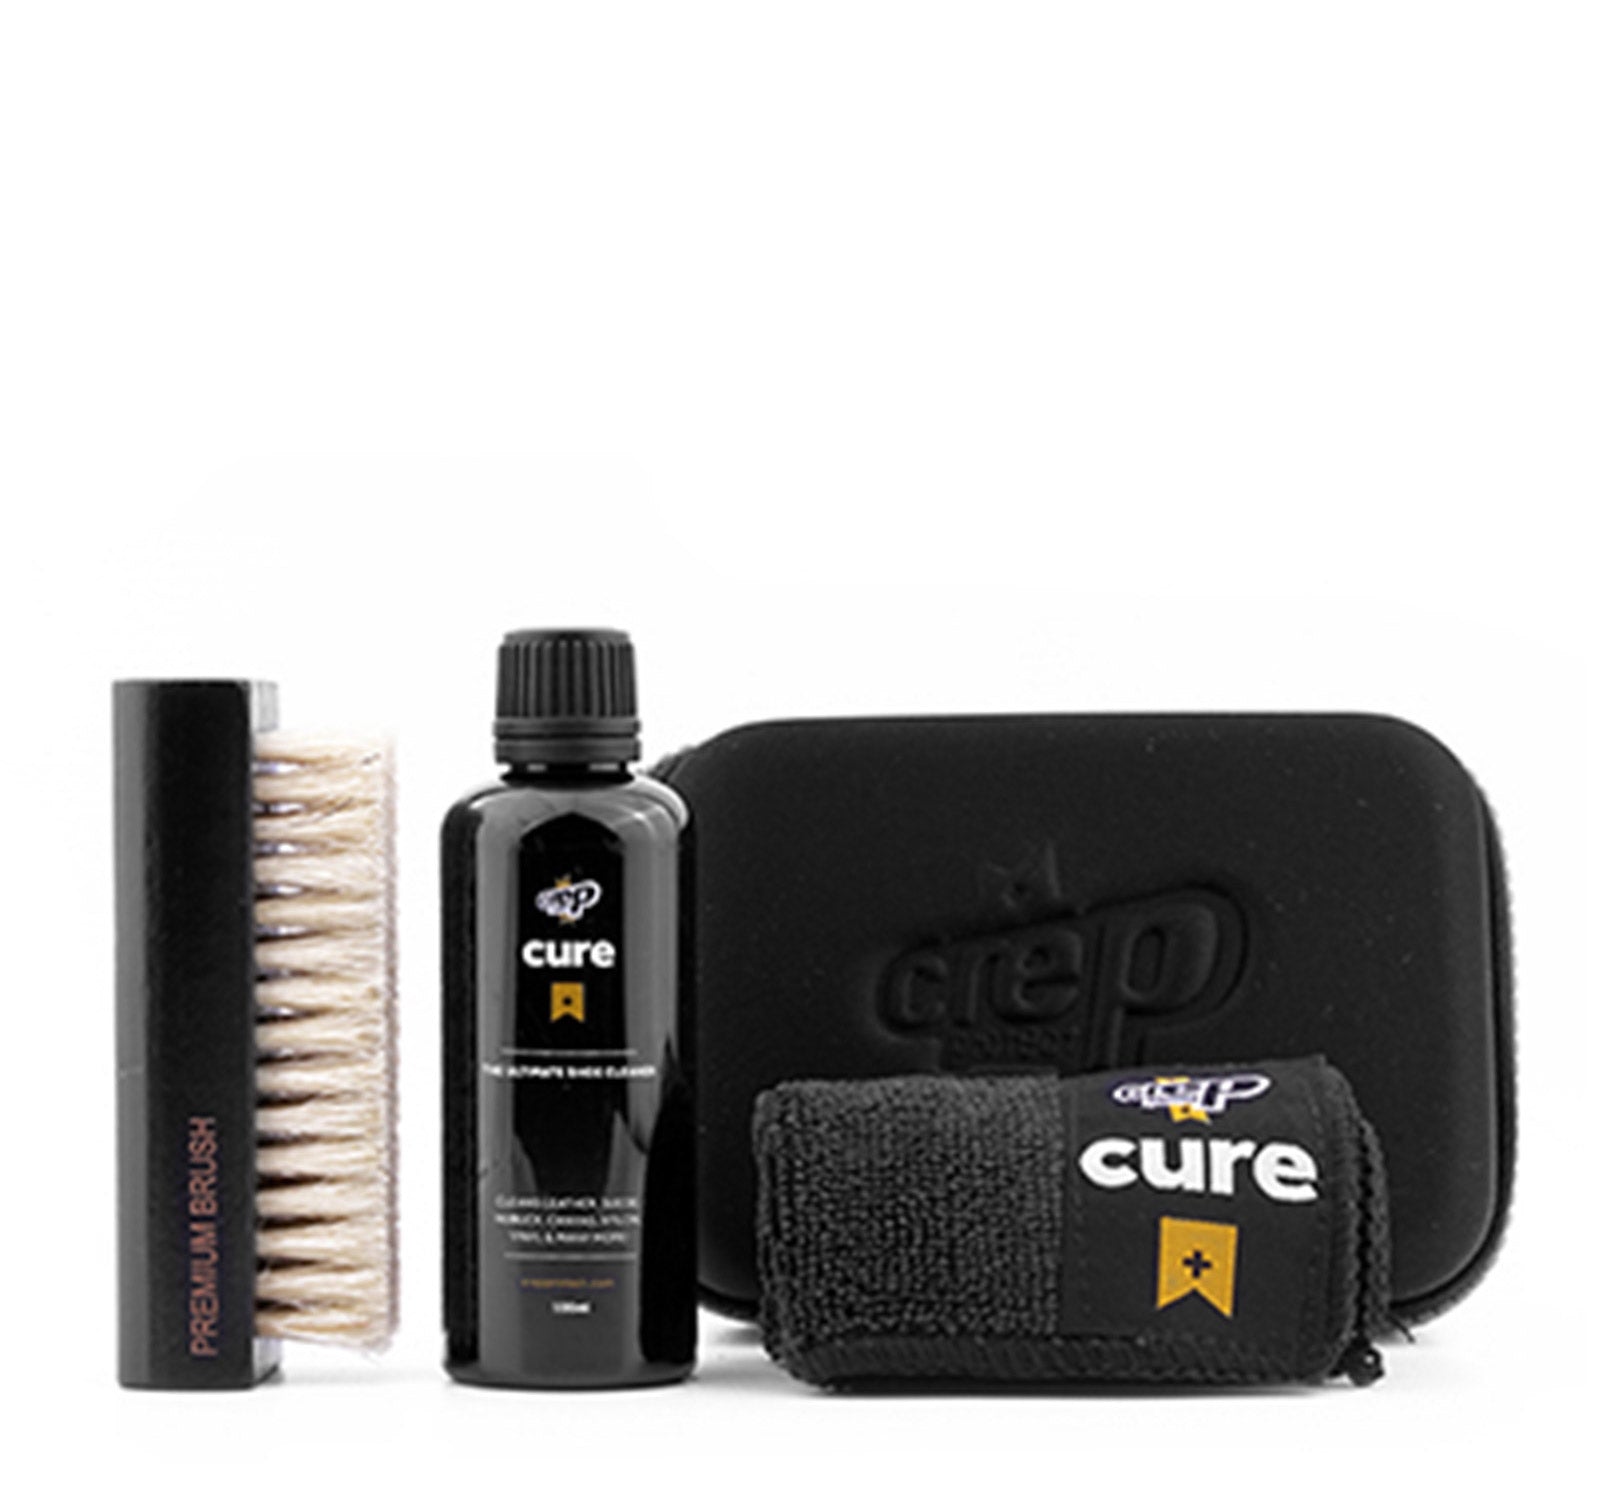 Crep Protect The Cure Kit Shoe Cleaning Spray, Hog Hair Brush & Microfibre  Cloth